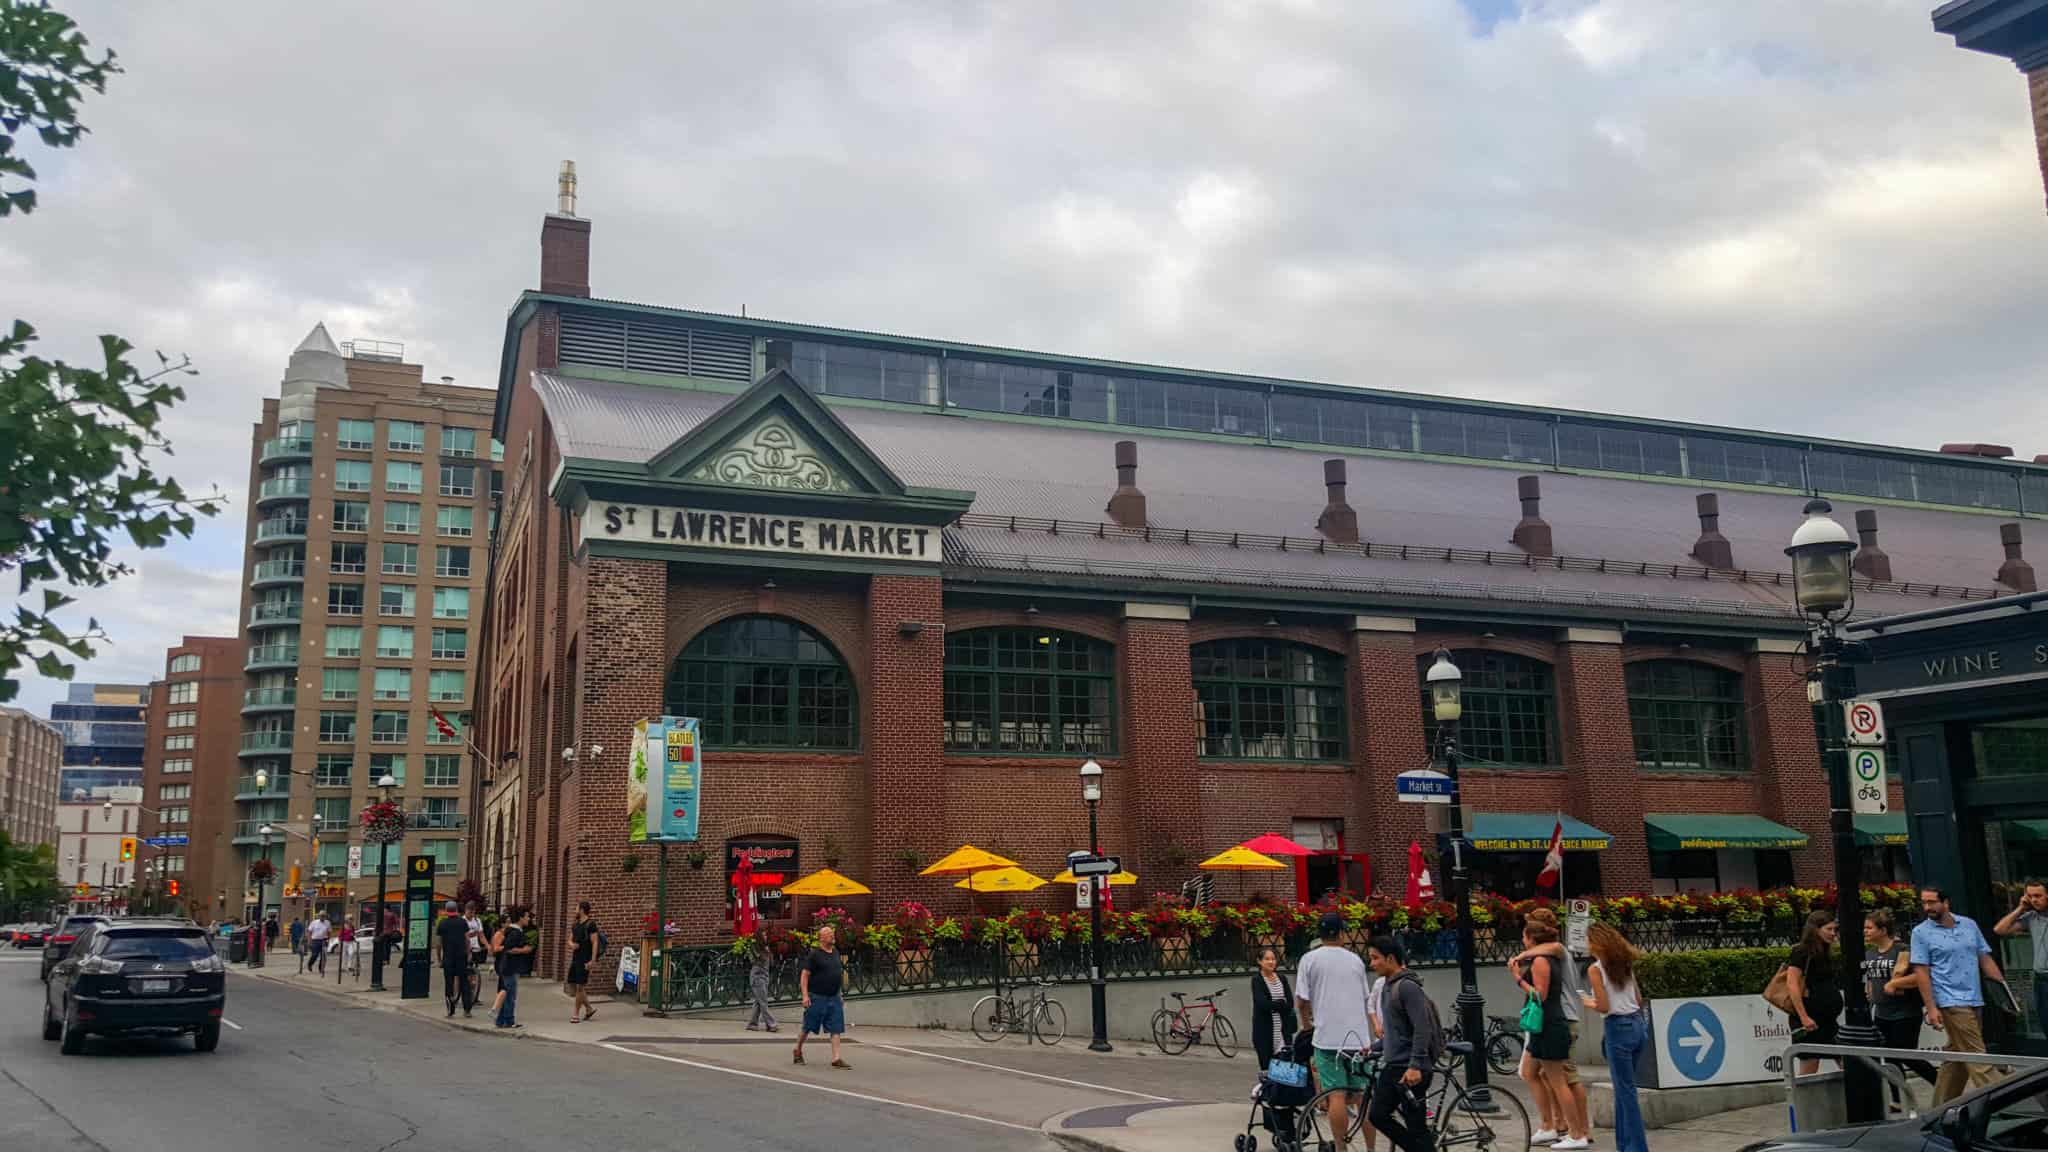 Exploring St. Lawrence Market is one of the free things to do in Toronto